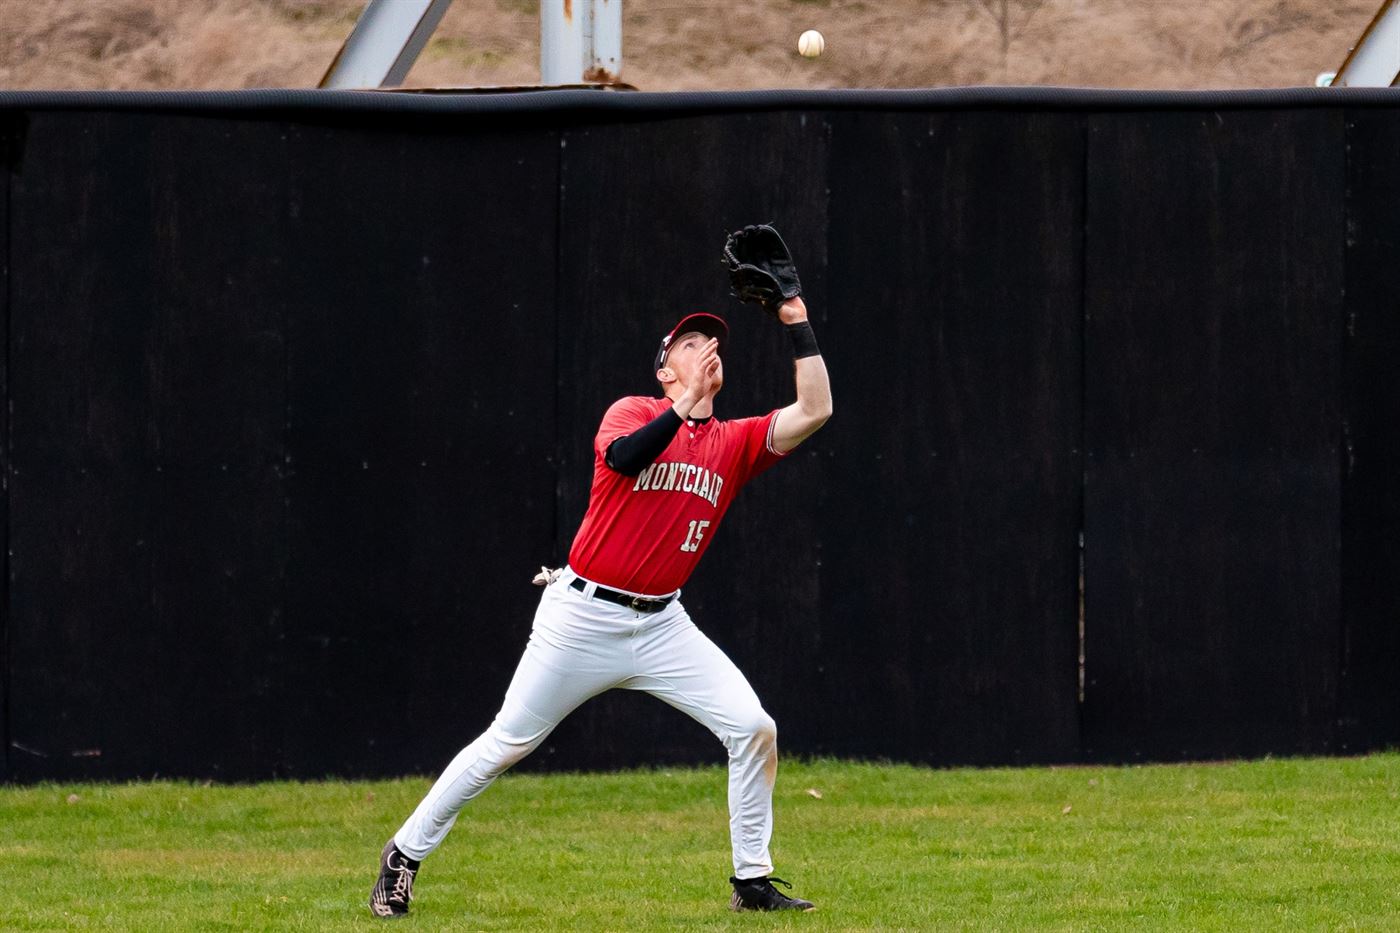 Senior outfielder Andrew Ollwerther tries to secure a fly ball. Chris Krusberg | The Montclarion